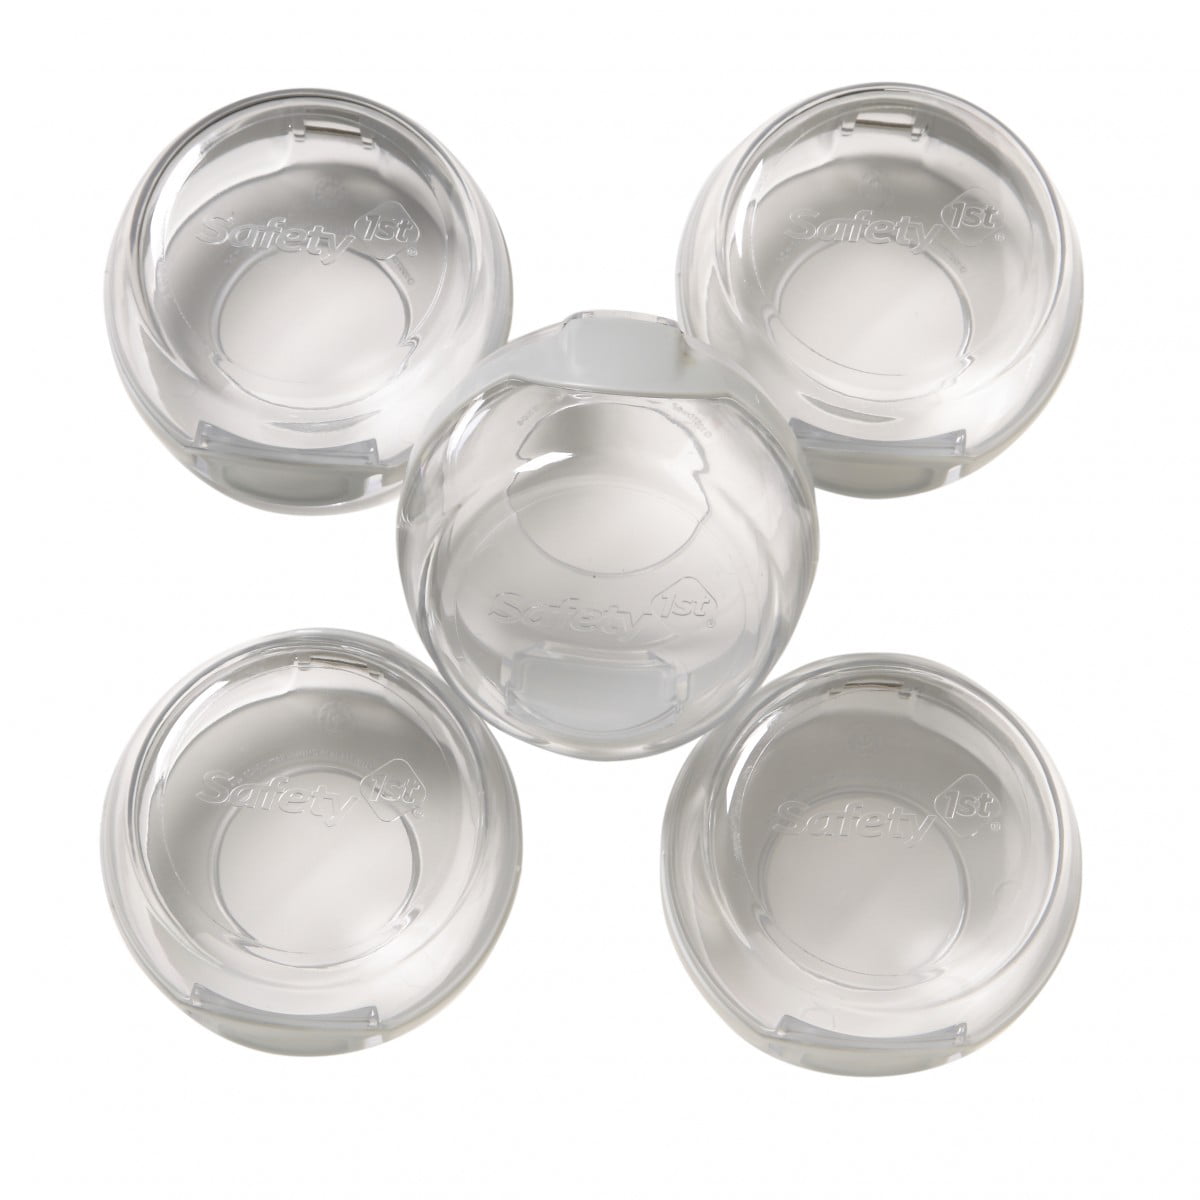 Safety 1st Clear View Stove Knob Covers - Clear - 5 Pack | Walmart Canada